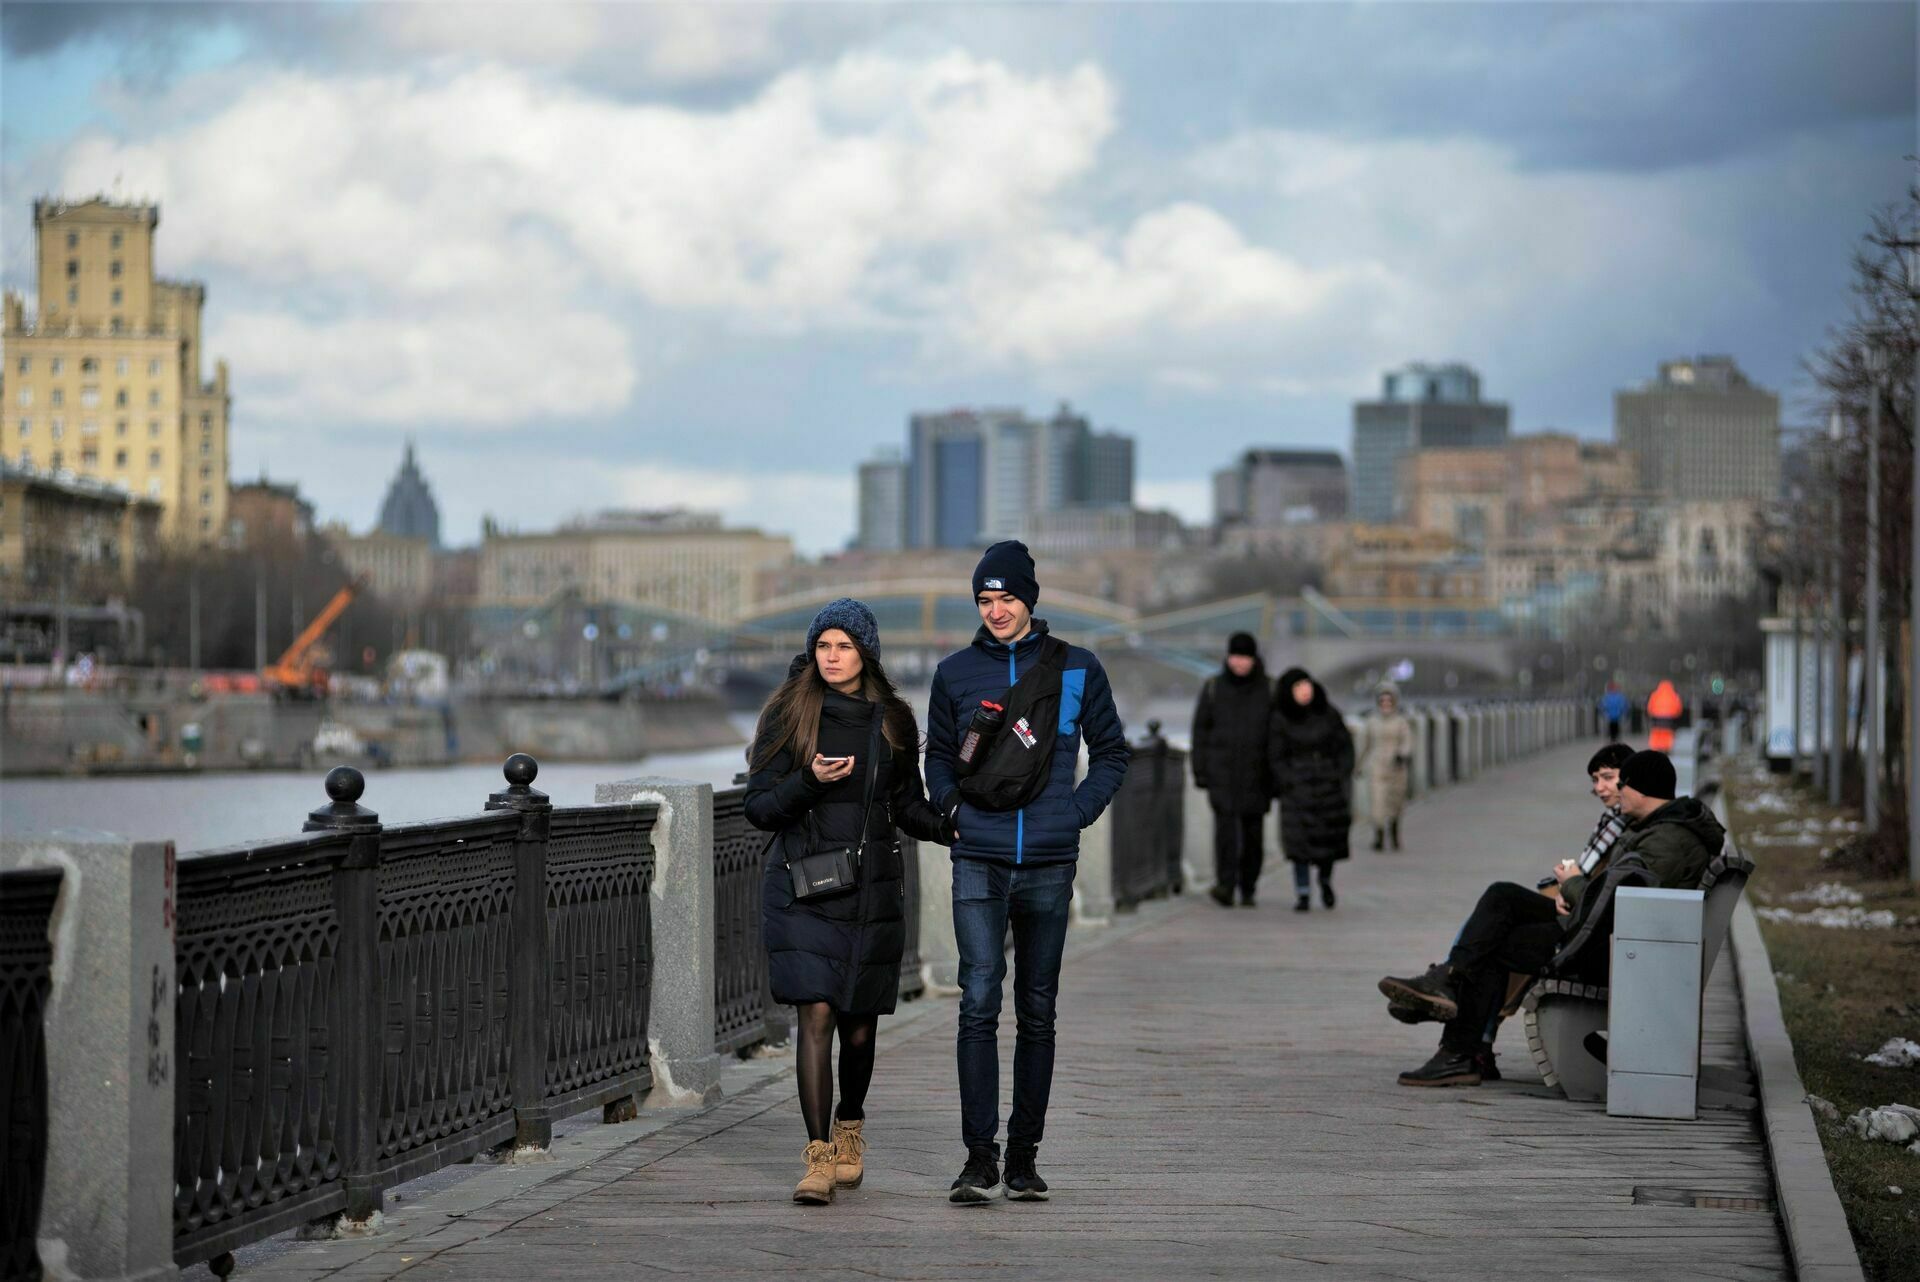 A record high atmospheric pressure is set in Moscow for the third day in a row